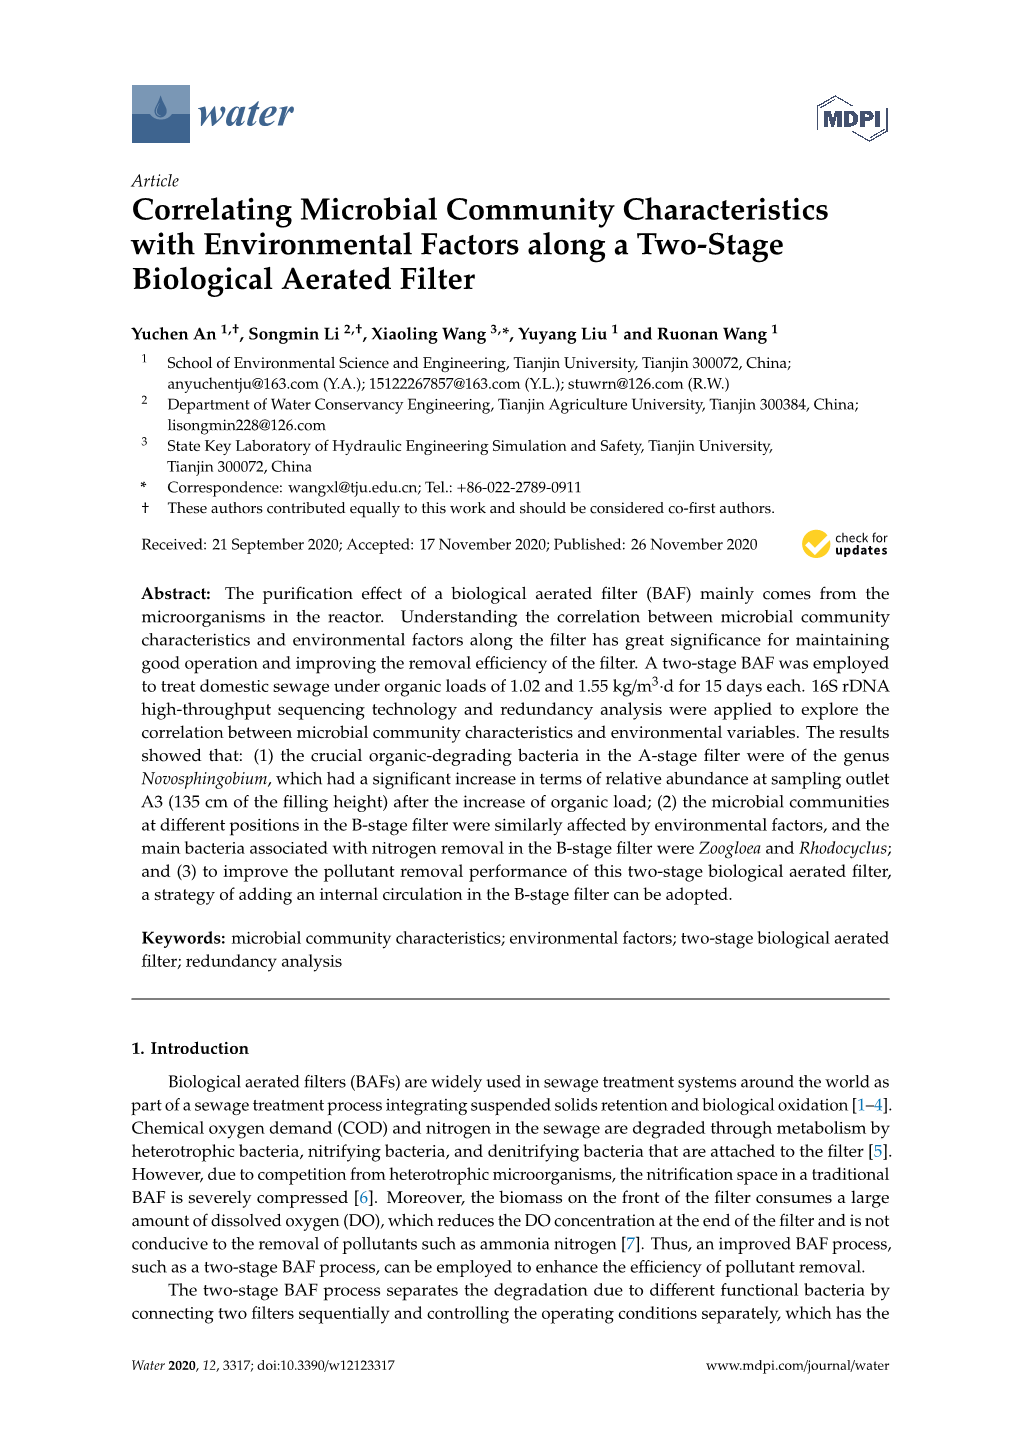 Correlating Microbial Community Characteristics with Environmental Factors Along a Two-Stage Biological Aerated Filter